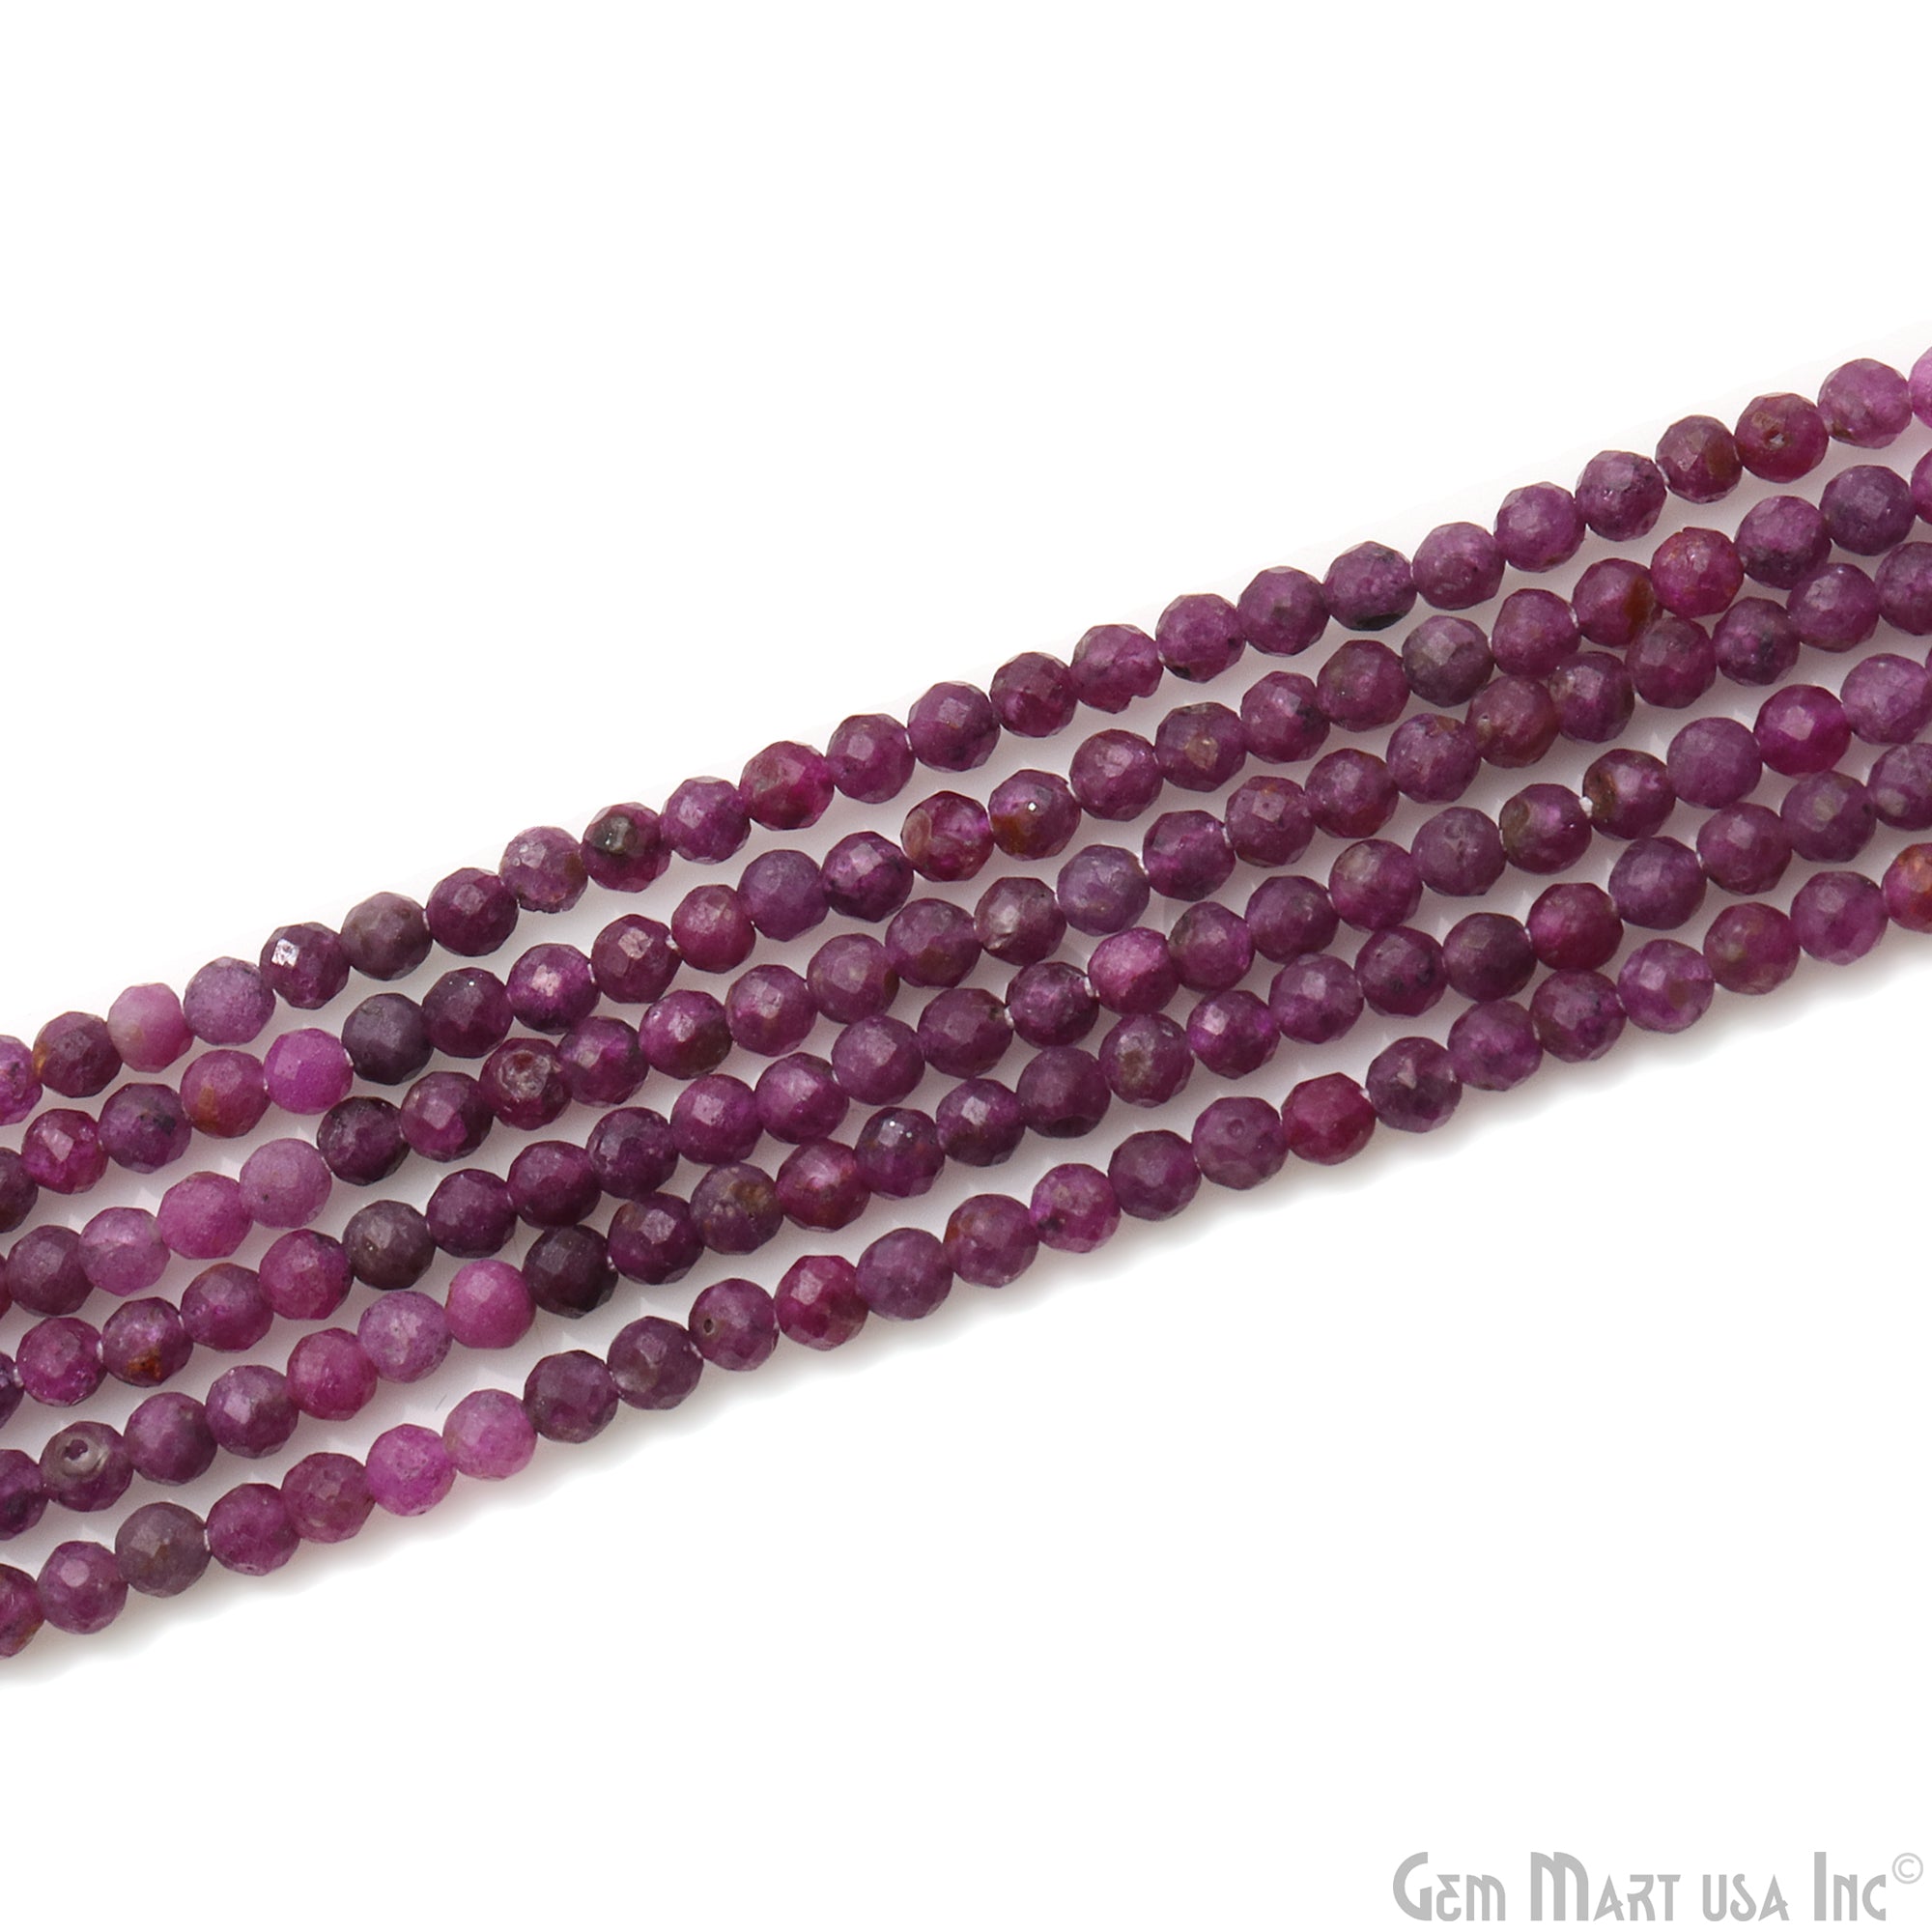 Ruby Faceted 3mm Gemstone Rondelle Beads 1 Strand